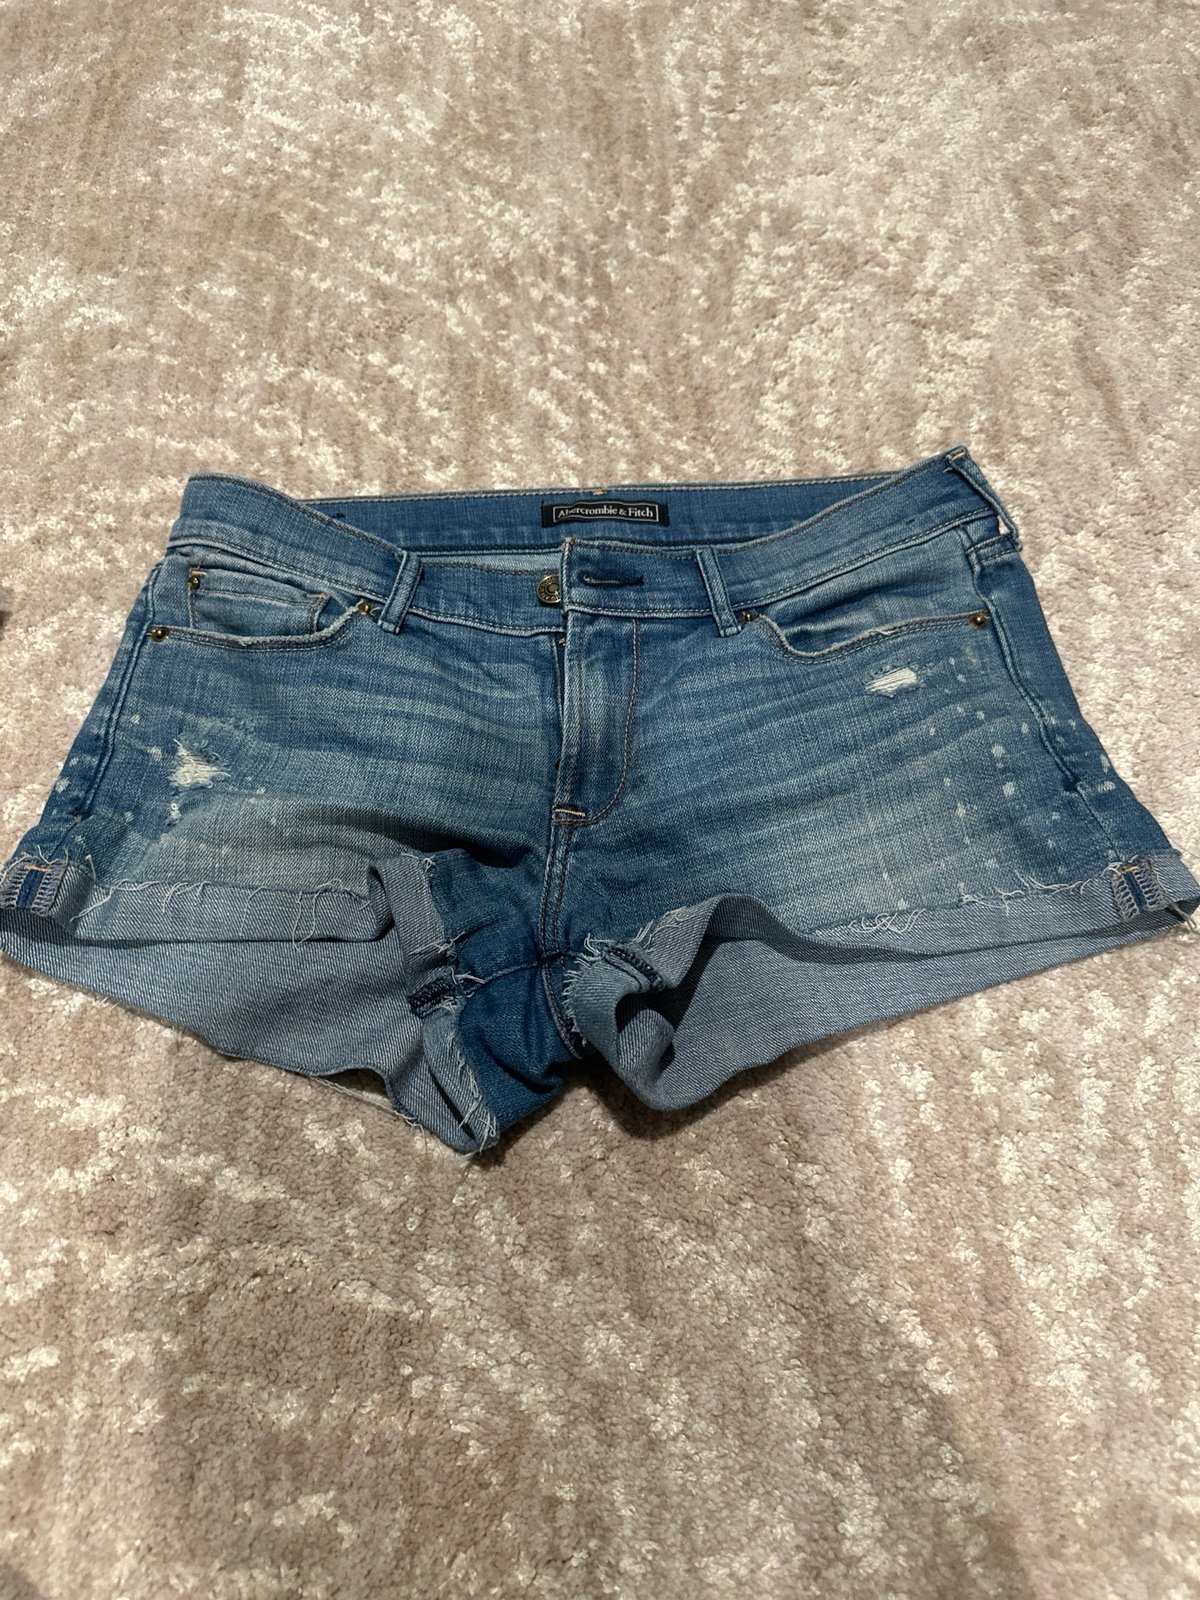 large discount Abercrombie and Fitch shorts KIidc8ONf Outlet Store